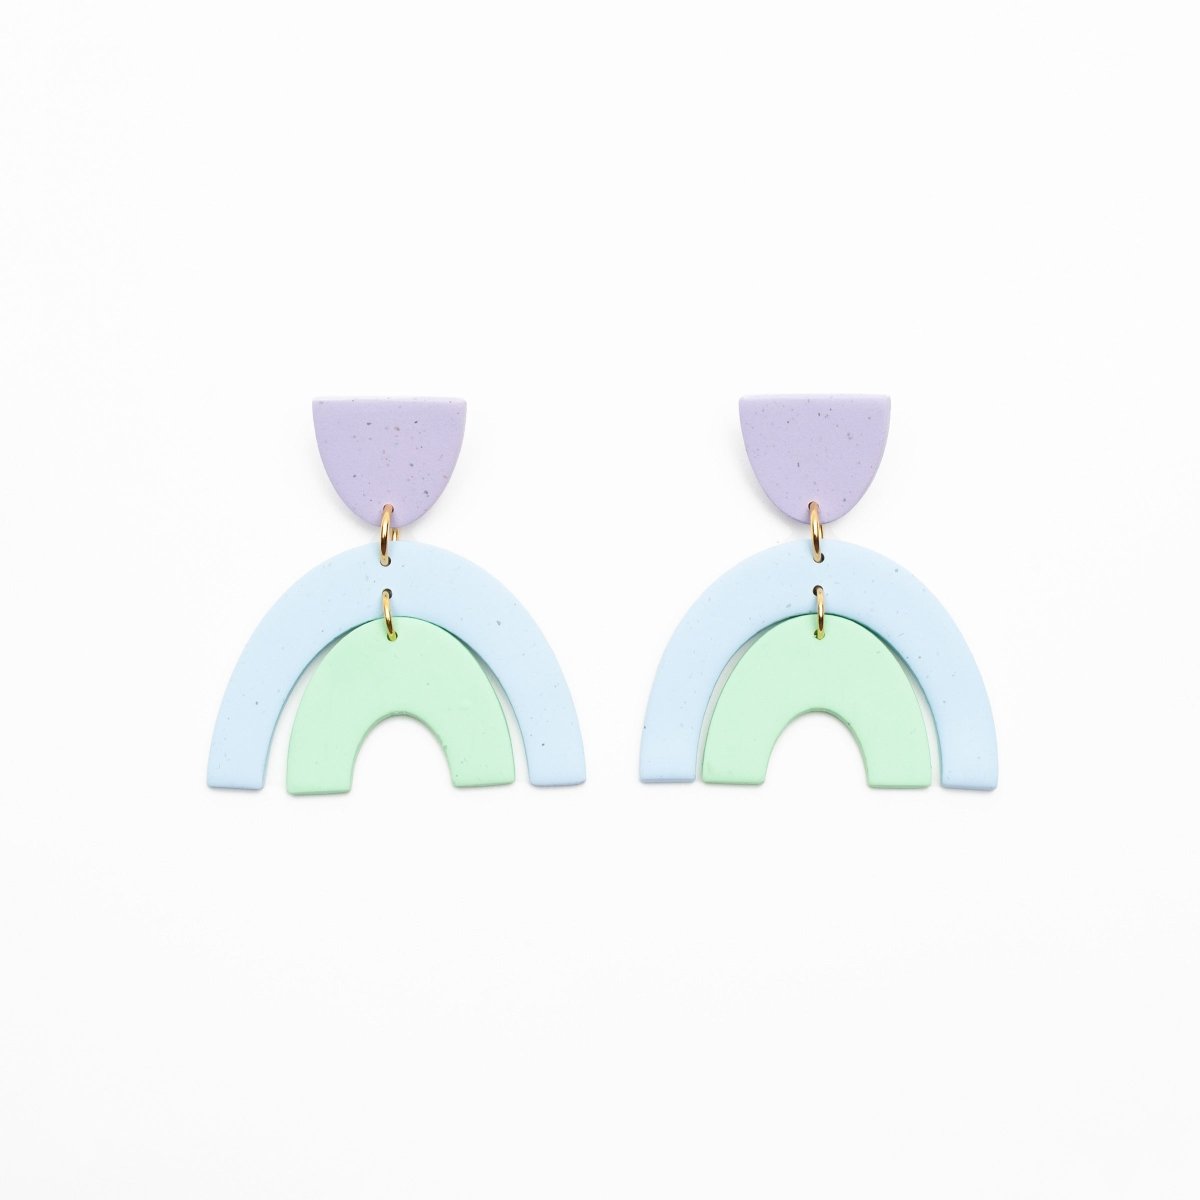 A pair of light purple, blue and green polymer clay earrings with a small half oval stud and two nestled arches connected by stainless steel. Designed and crafted in Portland, Oregon by The Baked Clay Studio.